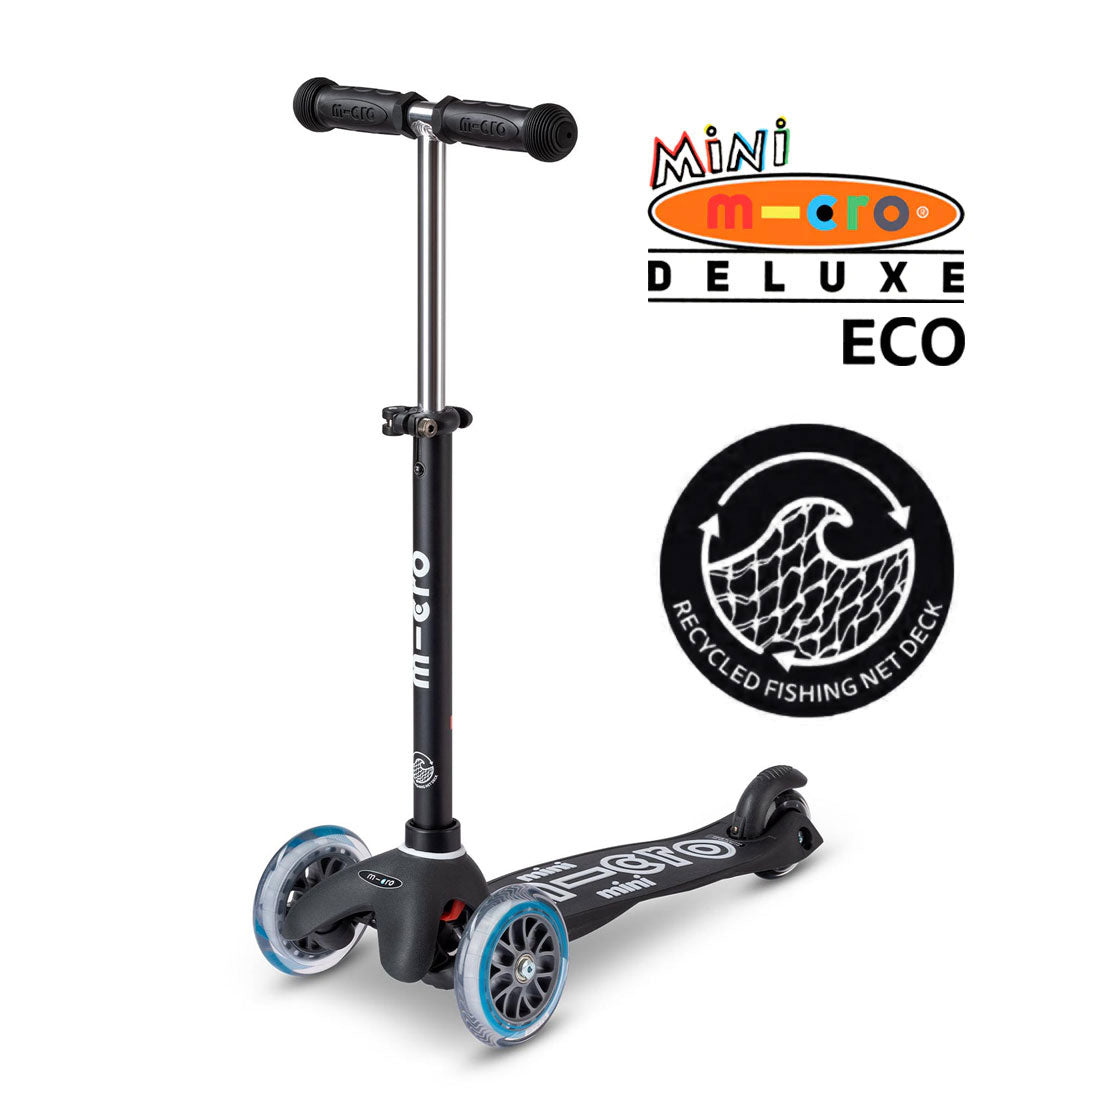 Micro Mini Deluxe ECO Scooter - Black Scooter Completes Rec